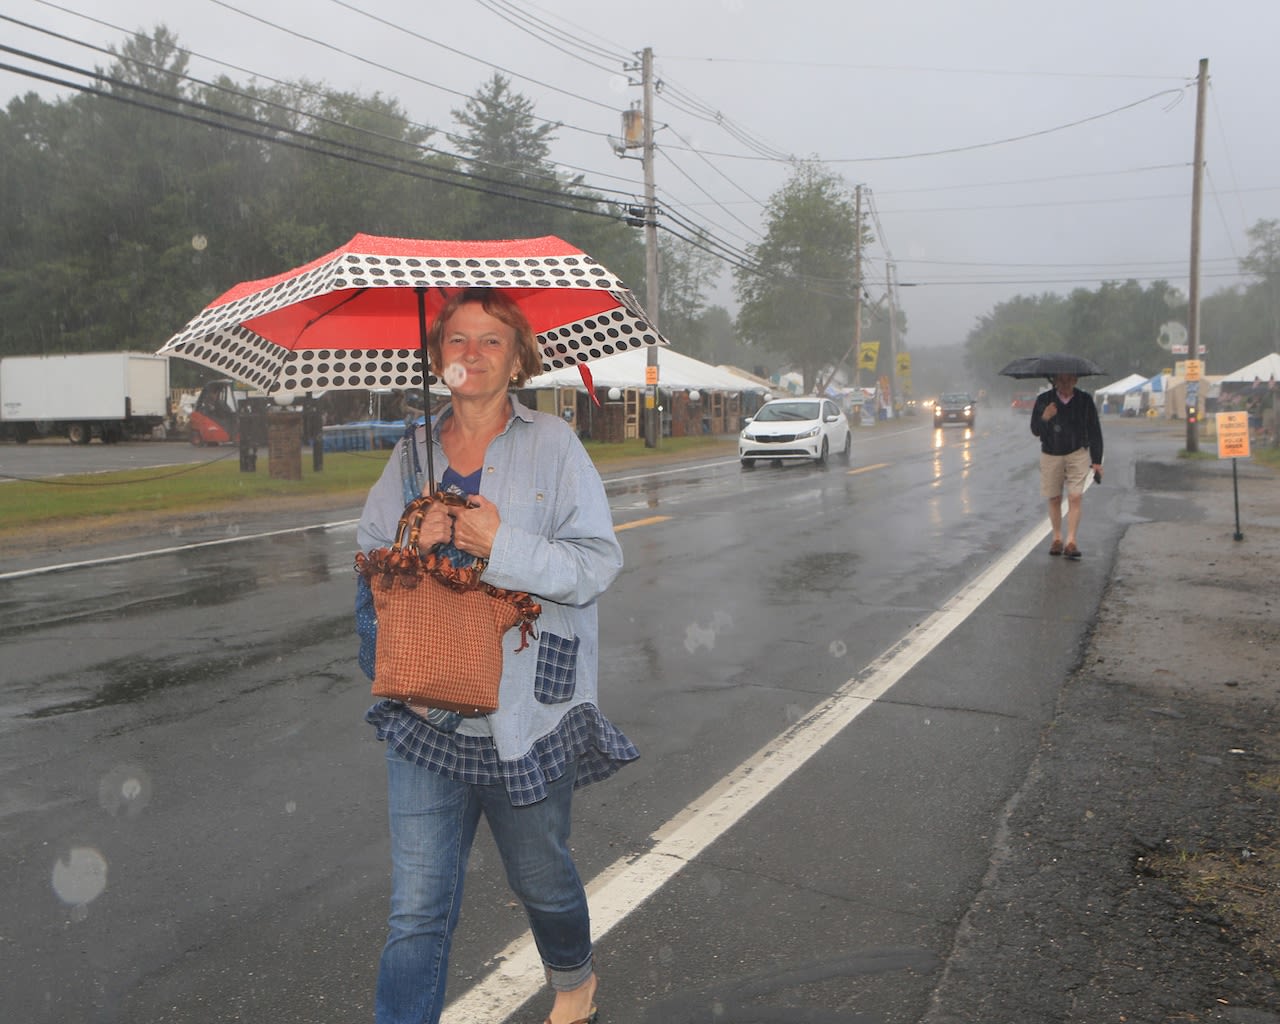 Brimfield Flea Market weather: What to know about rainy week